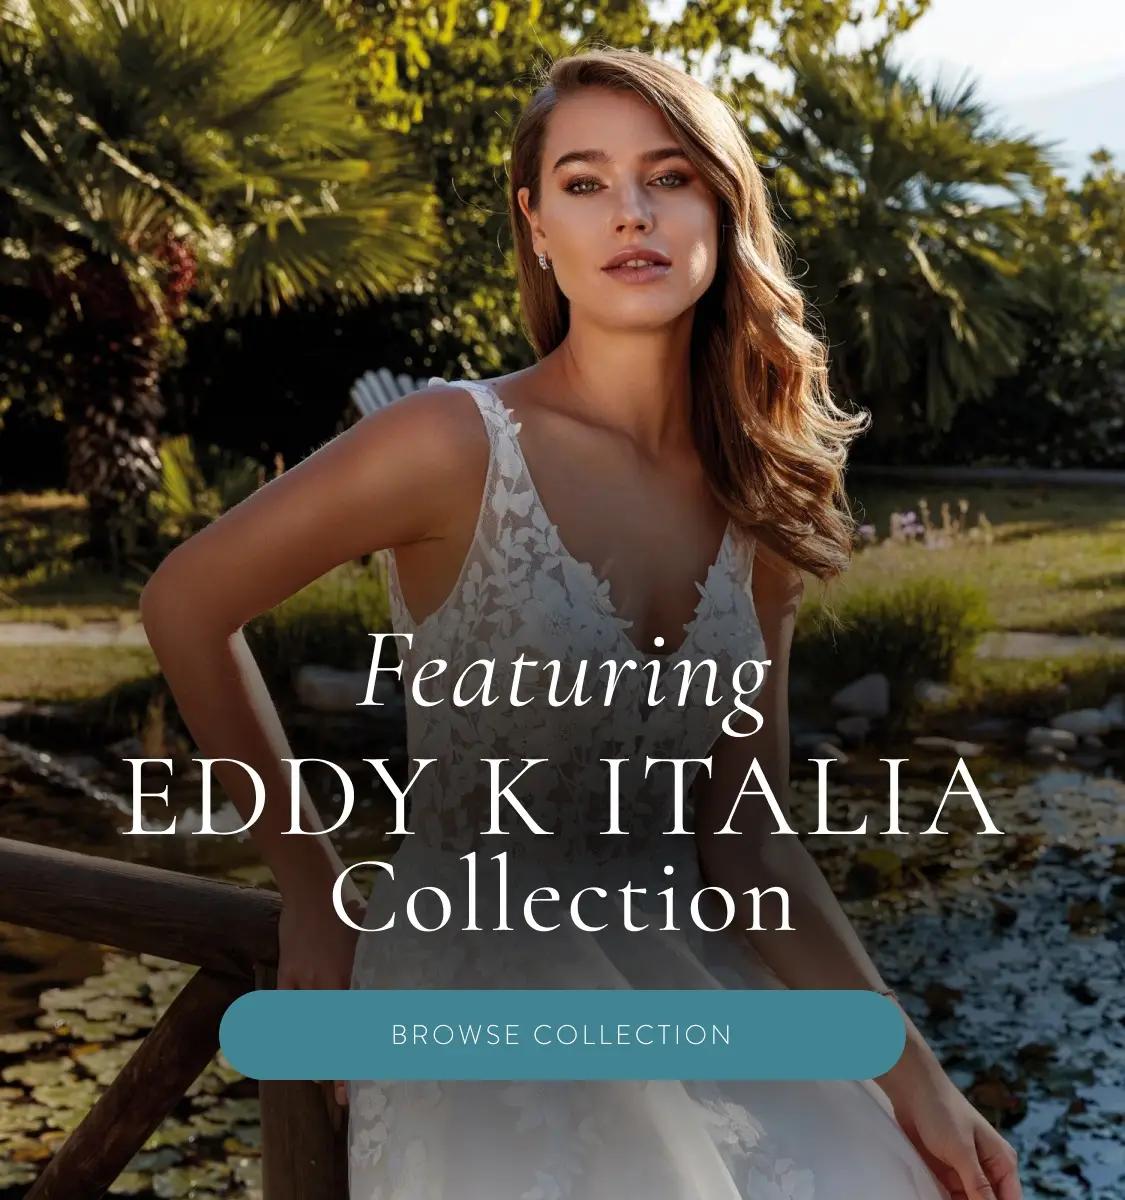 Mobile Featuring Eddy K Italia Collection Banner